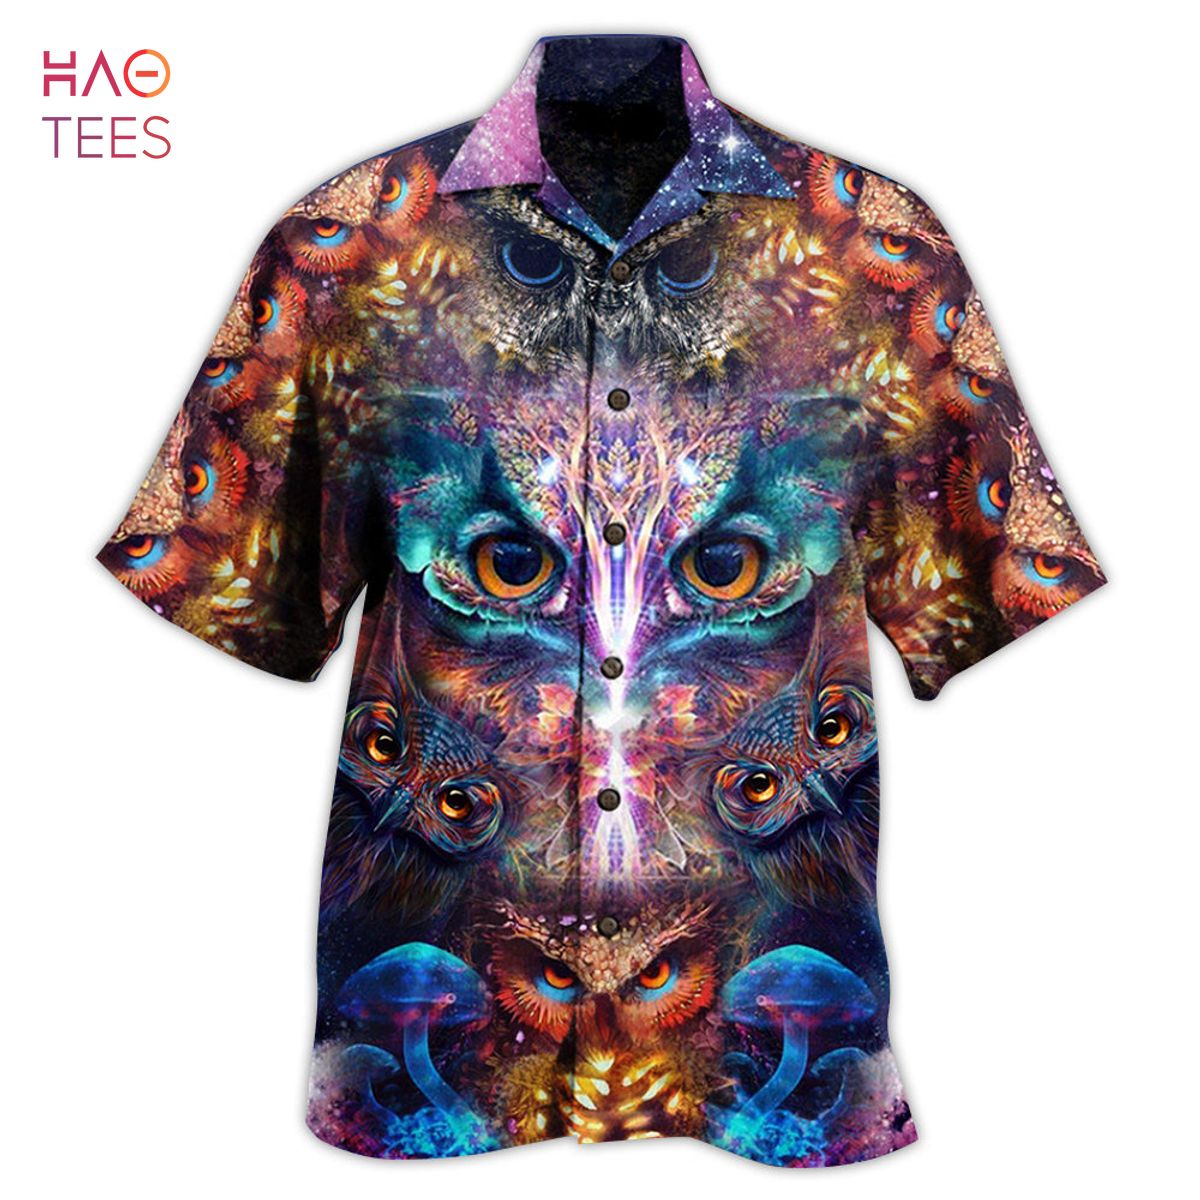 TREND Awesome Eyes Limited Edition Hawaiian Shirt